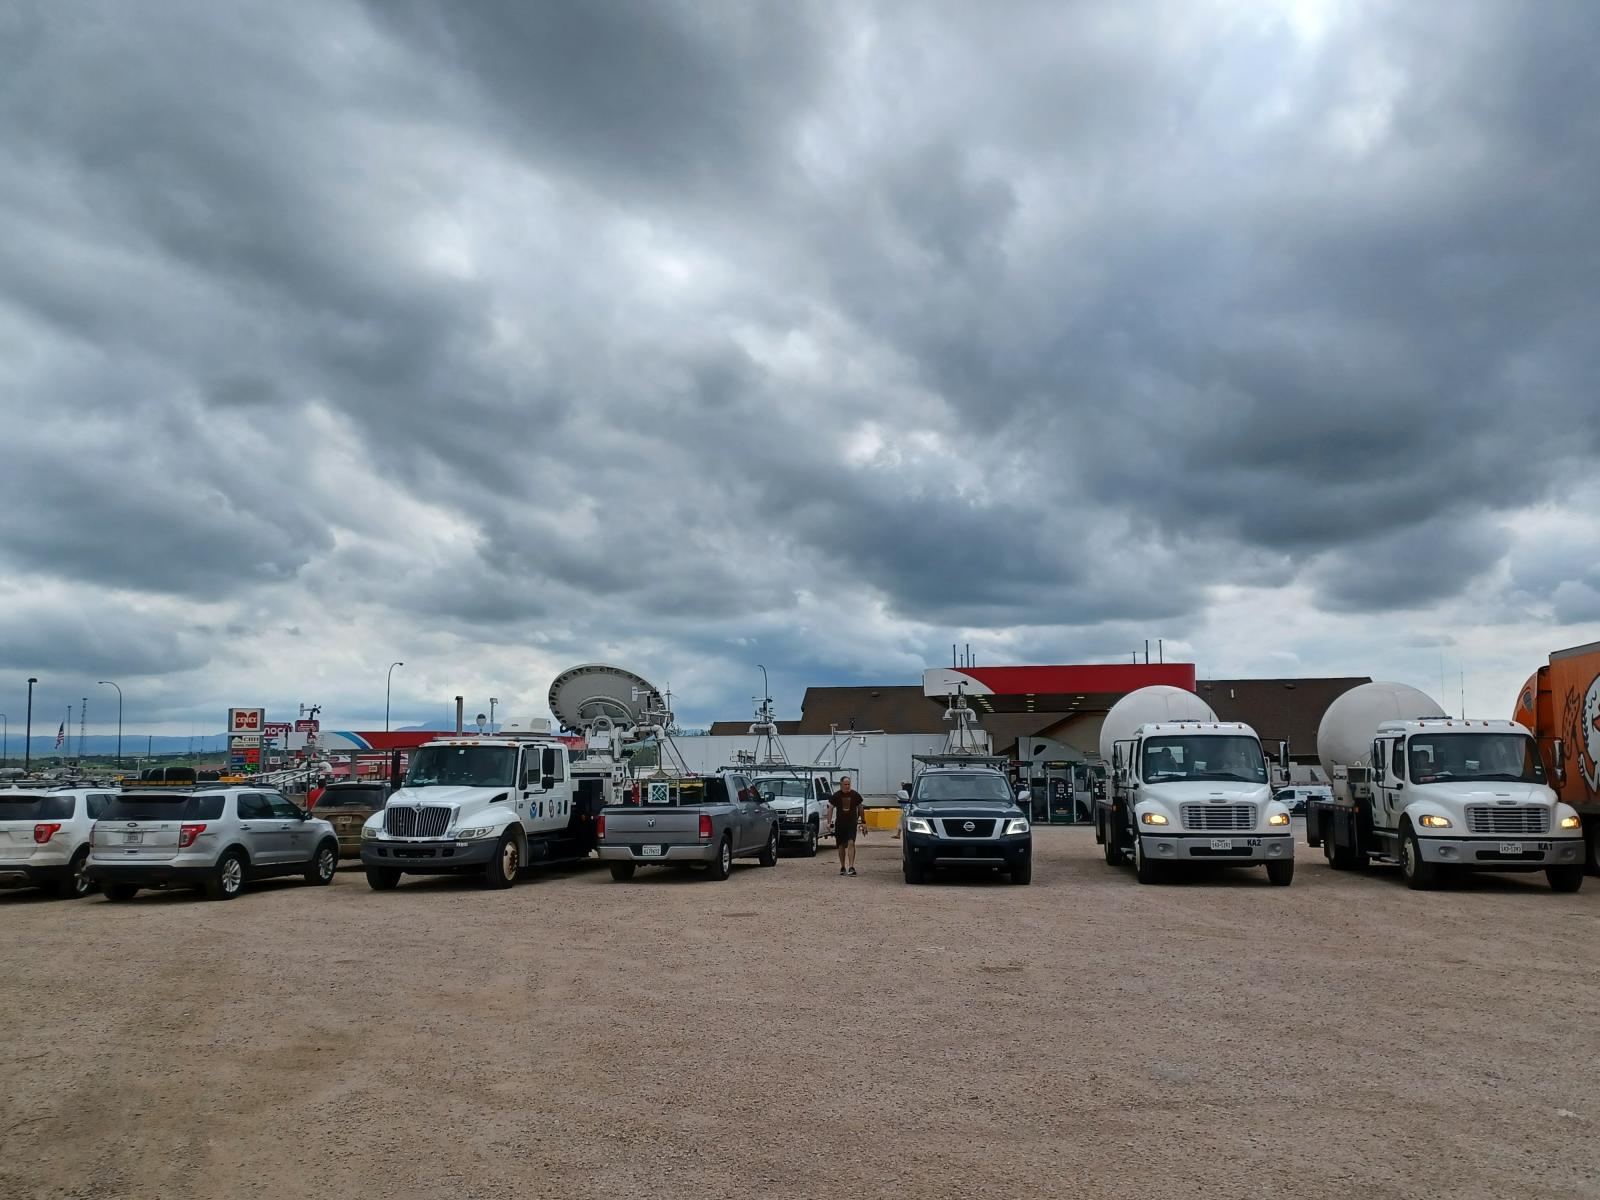 NWS DOW vehicles waiting for storms to develop